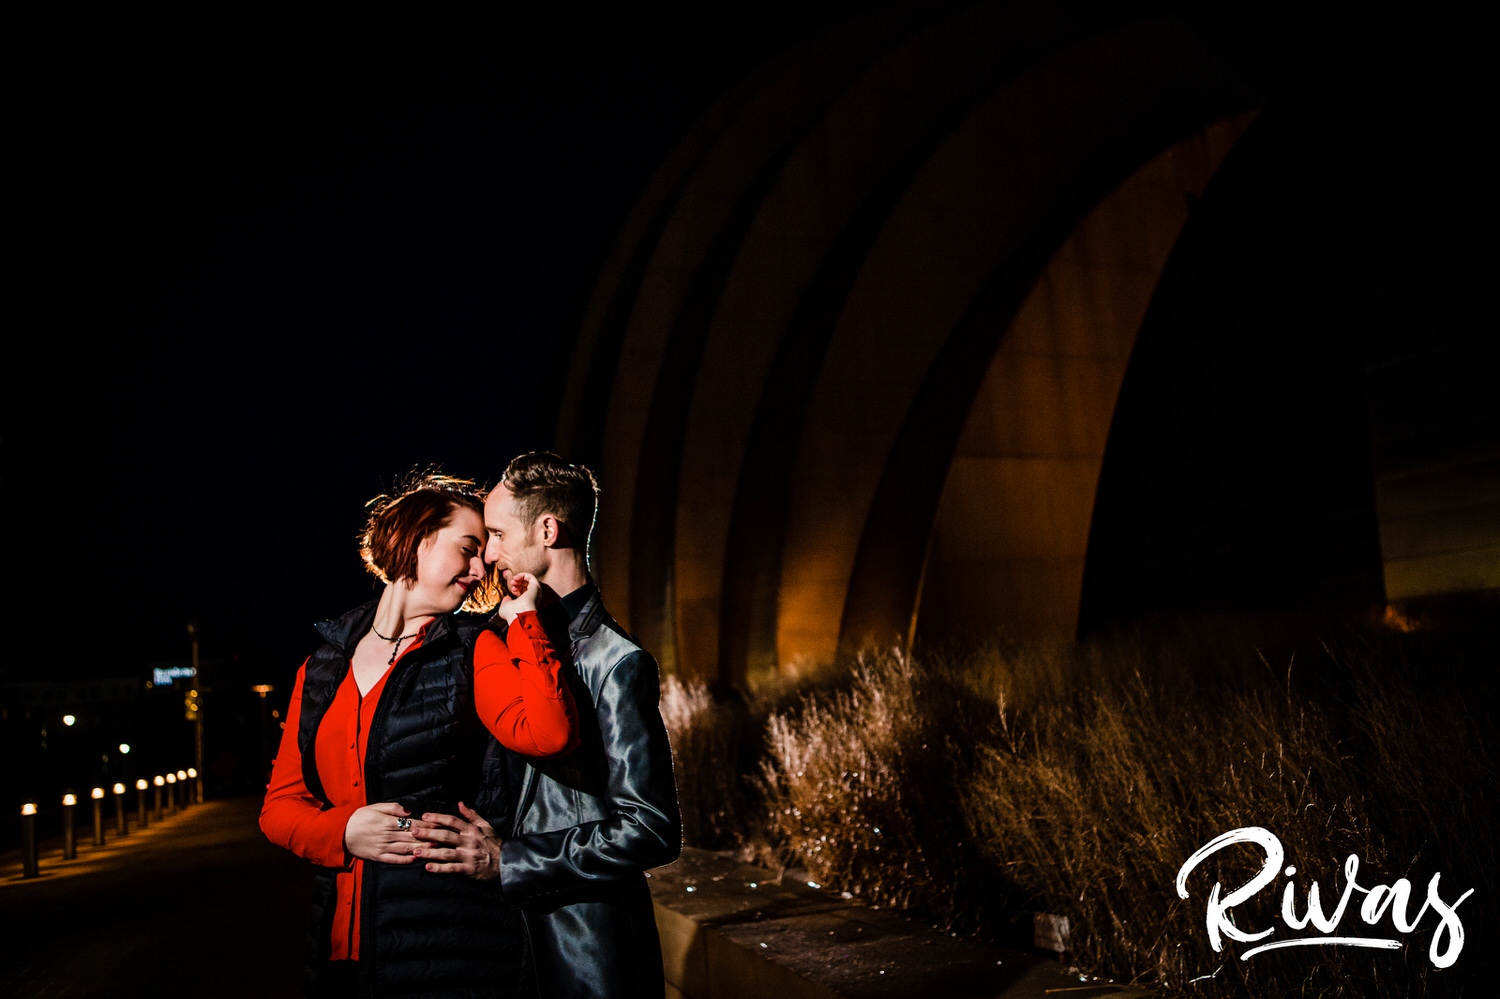 An intimate picture of an engaged couple sharing an embrace outside the Kauffman Center for the Performing Arts in Kansas City after dark. 